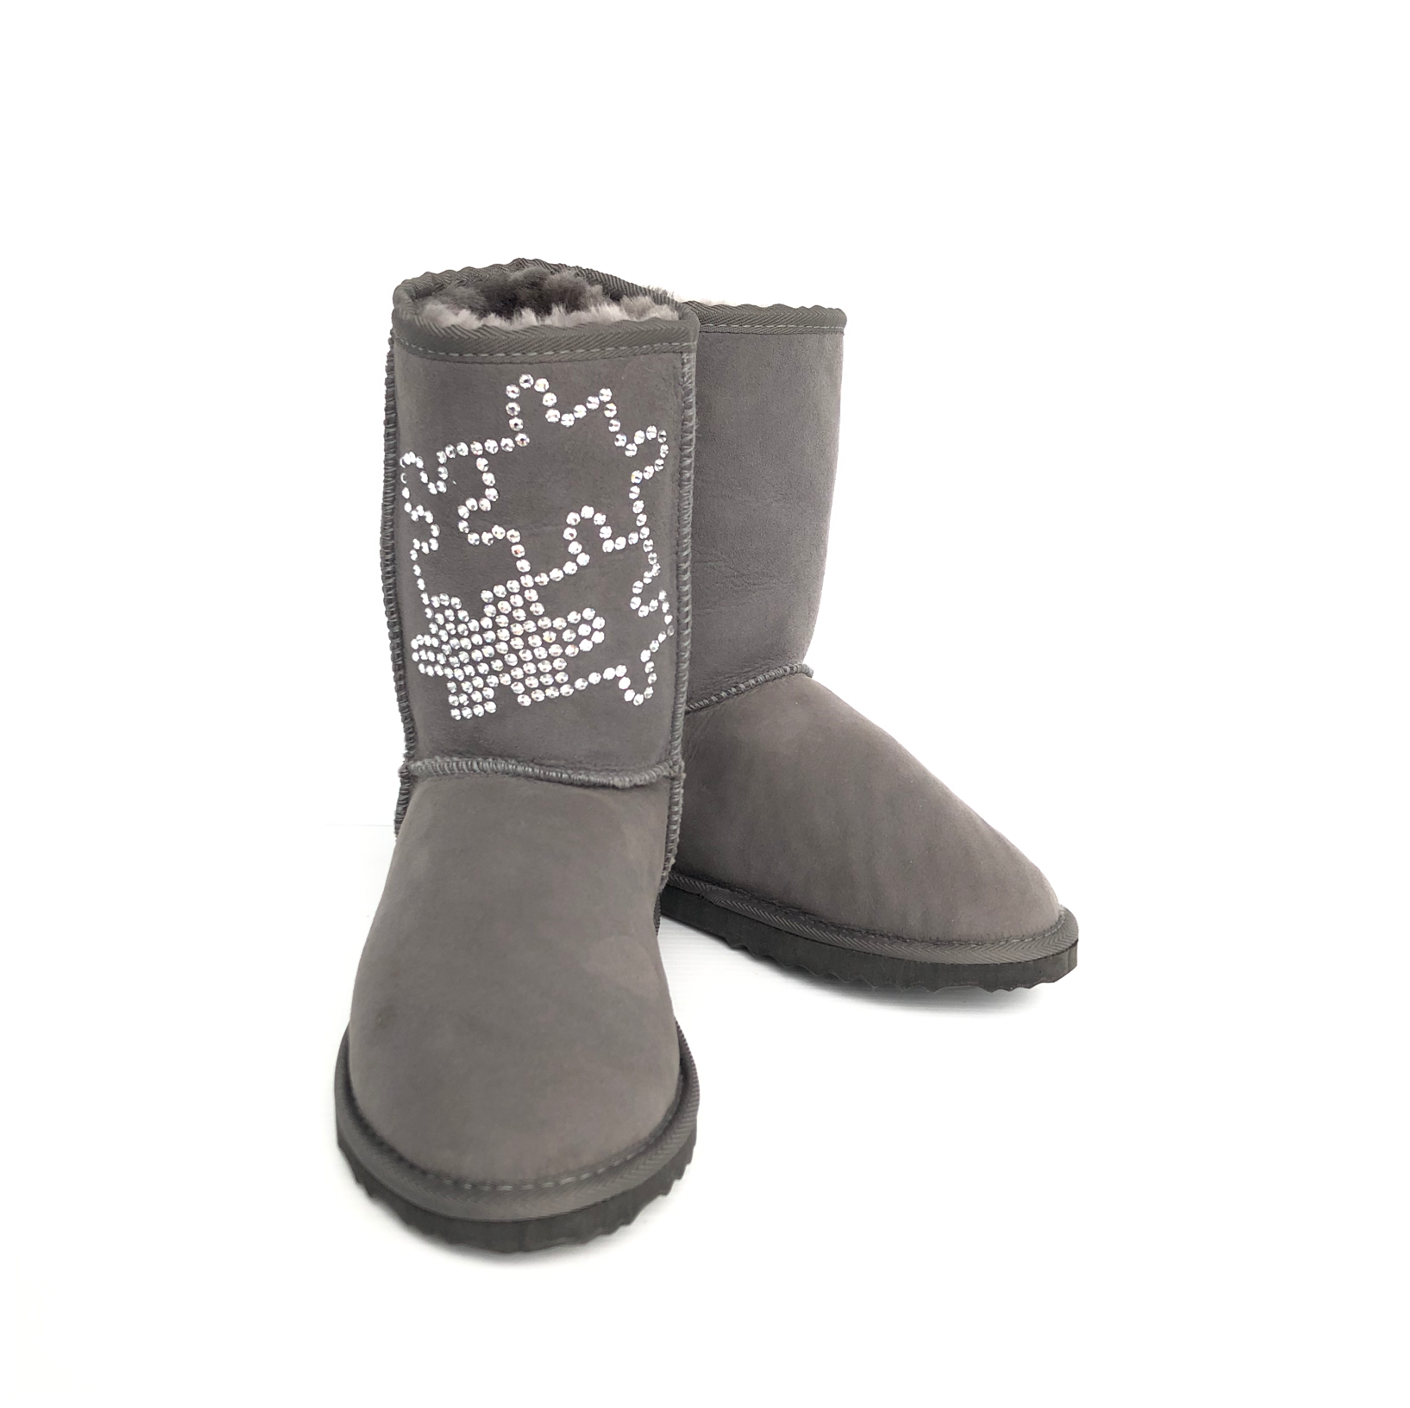 CLEARANCE SHORT DELUXE BOOTS GREY (with Swarovski design) - AU WOMEN'S 5 | MEN'S 4